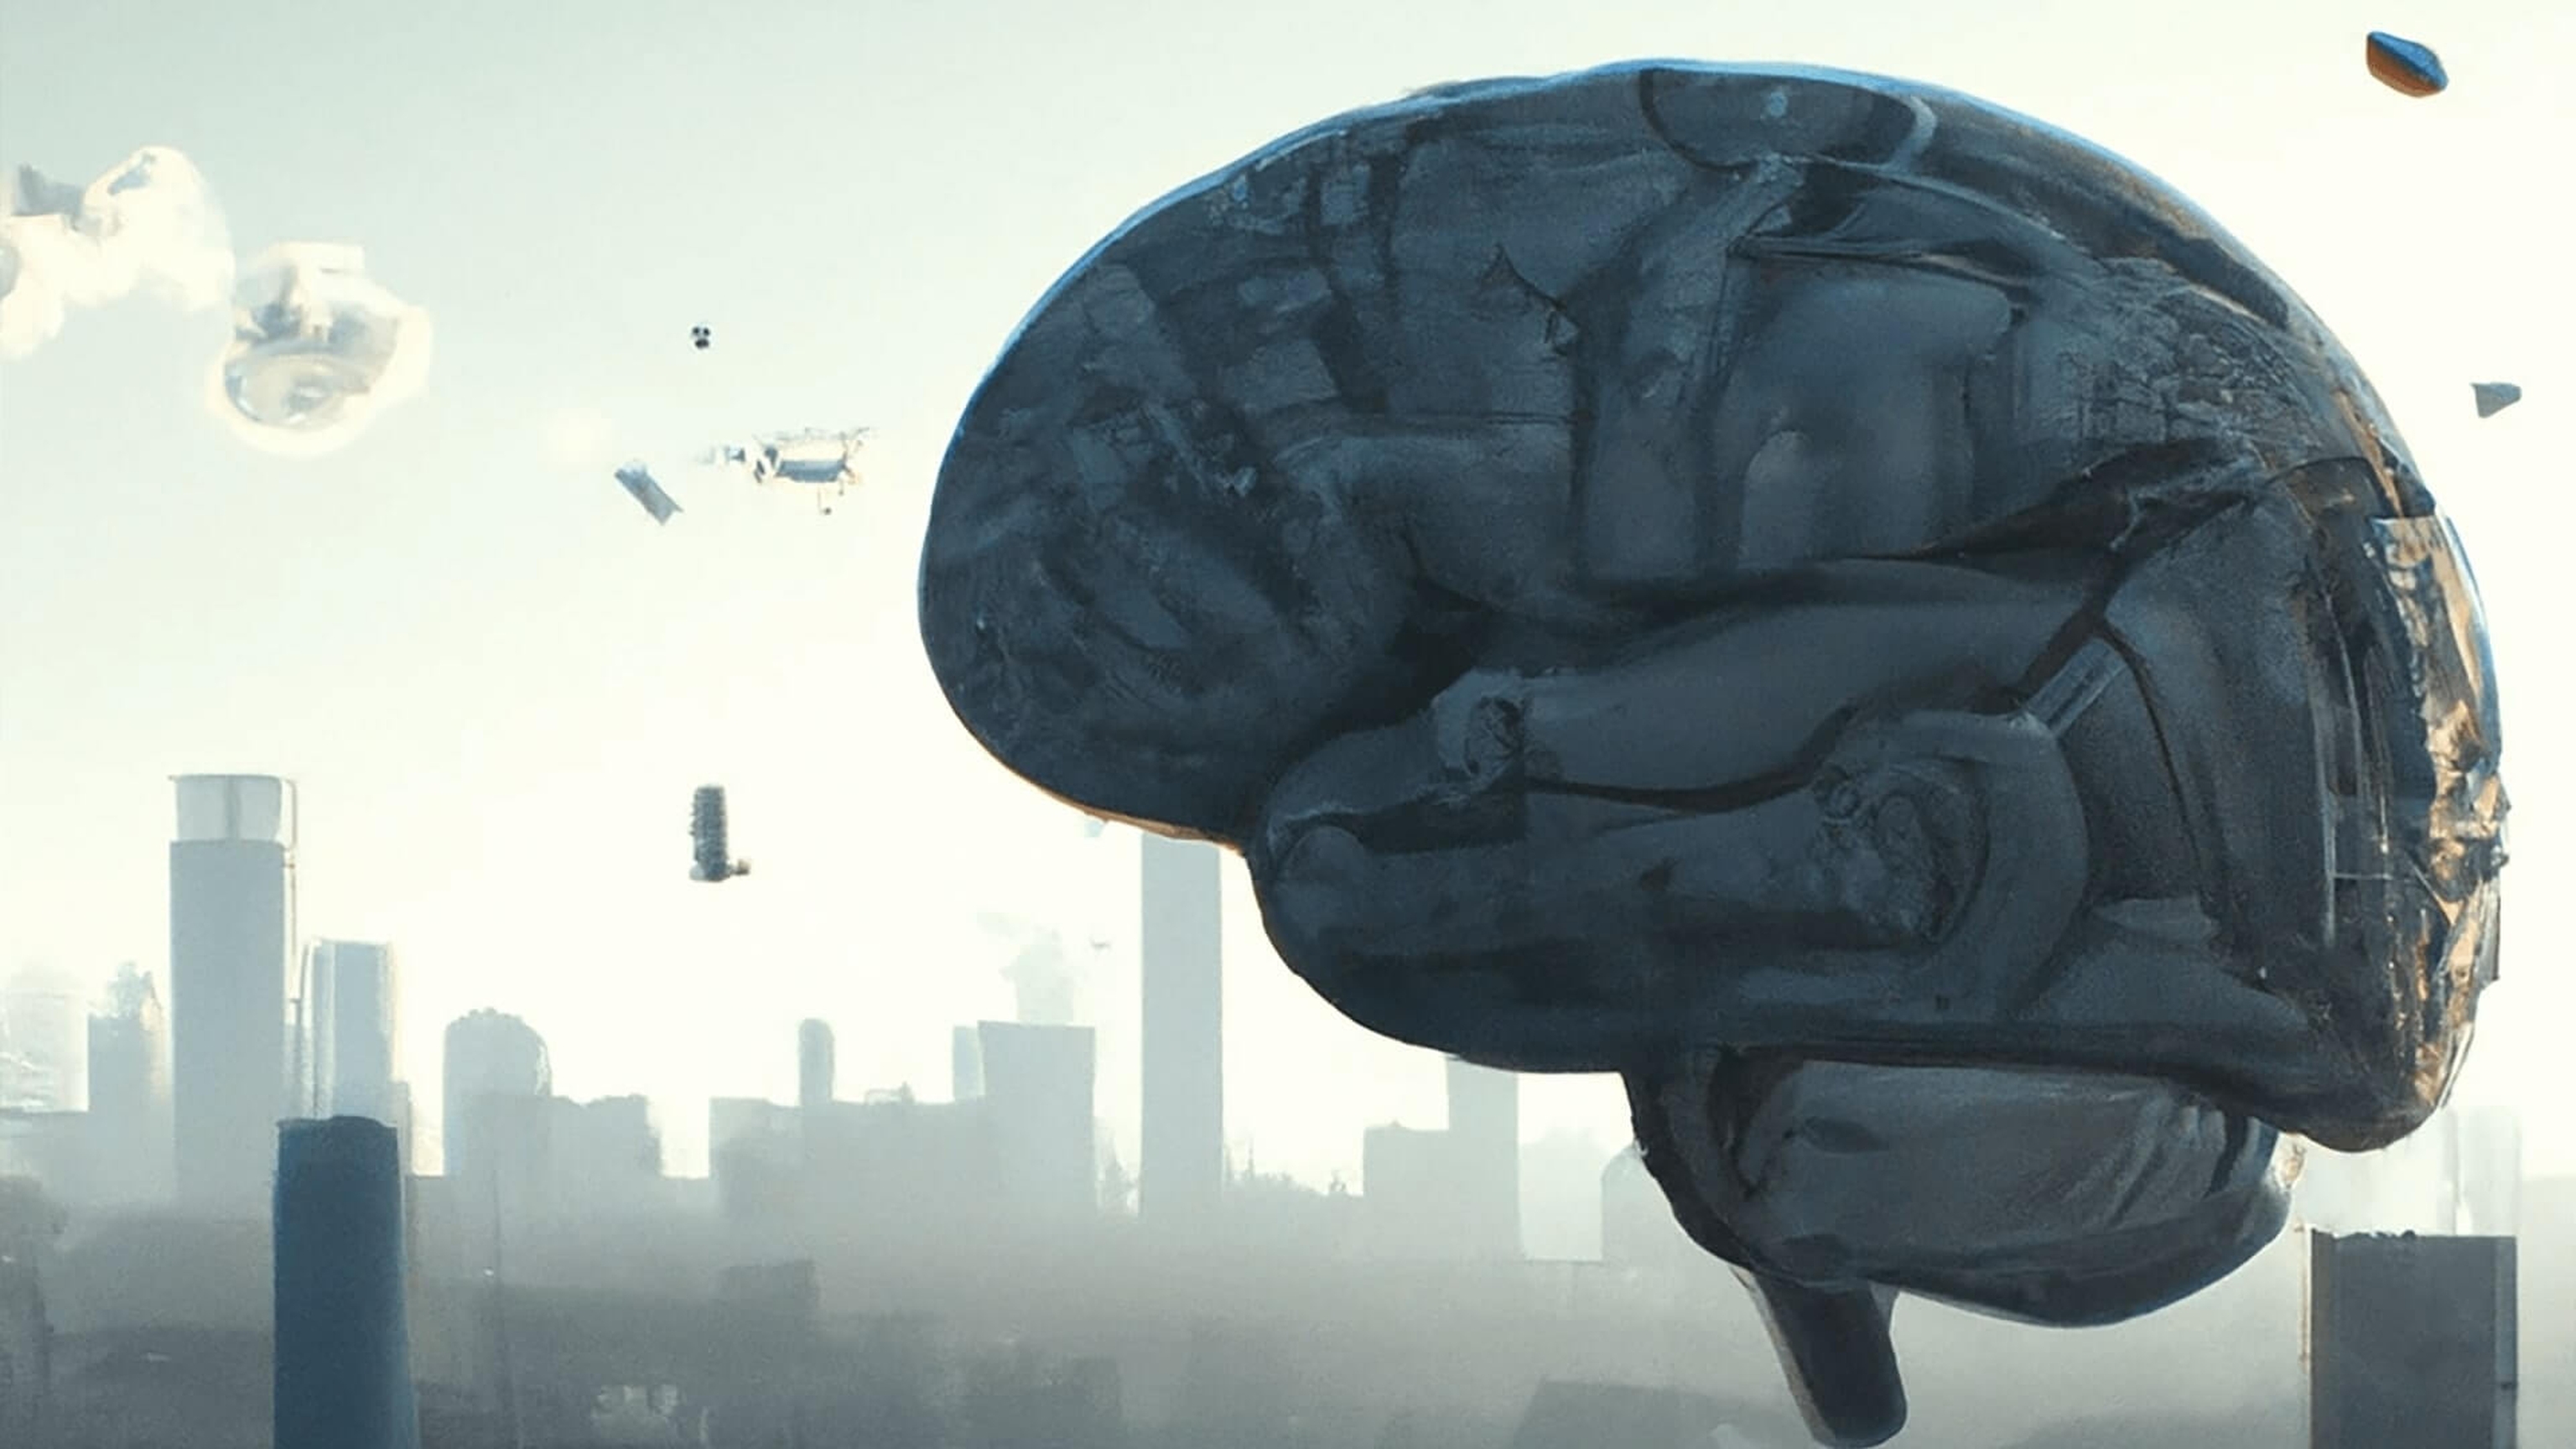 A giant brain floats in the sky above a modern city in this image generated by Saint Walker using AI